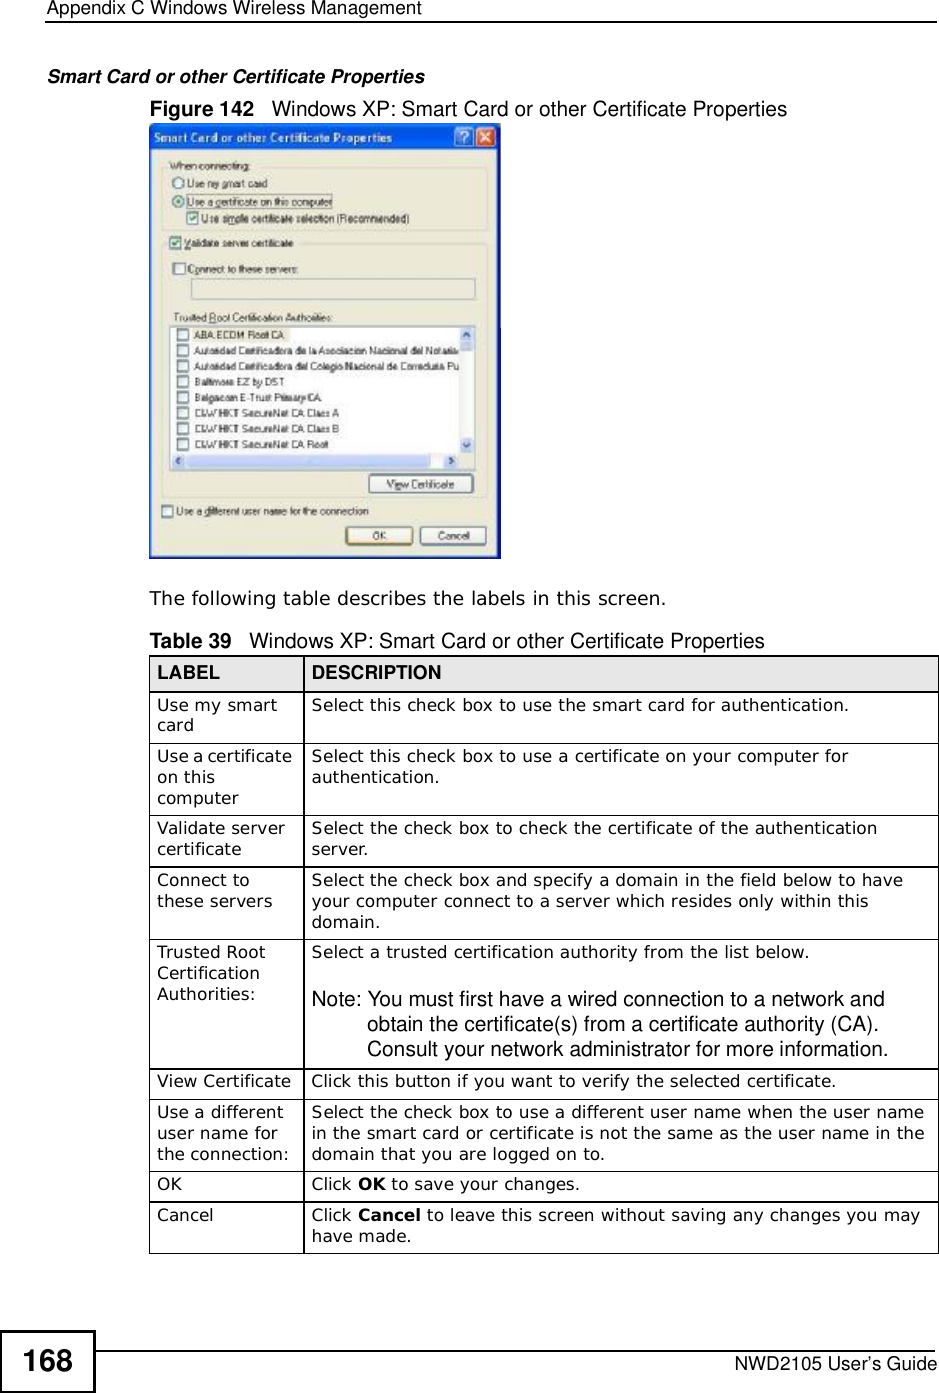 Appendix CWindows Wireless ManagementNWD2105 User’s Guide168Smart Card or other Certificate PropertiesFigure 142   Windows XP: Smart Card or other Certificate PropertiesThe following table describes the labels in this screen.Table 39   Windows XP: Smart Card or other Certificate PropertiesLABEL DESCRIPTIONUse my smart card Select this check box to use the smart card for authentication.Use a certificate on this computerSelect this check box to use a certificate on your computer for authentication.Validate server certificate Select the check box to check the certificate of the authentication server.Connect to these servers Select the check box and specify a domain in the field below to have your computer connect to a server which resides only within this domain.Trusted Root CertificationAuthorities:Select a trusted certification authority from the list below.Note: You must first have a wired connection to a network and obtain the certificate(s) from a certificate authority (CA). Consult your network administrator for more information.View CertificateClick this button if you want to verify the selected certificate.Use a different user name for the connection:Select the check box to use a different user name when the user name in the smart card or certificate is not the same as the user name in the domain that you are logged on to.OKClick OK to save your changes.CancelClick Cancel to leave this screen without saving any changes you may have made.